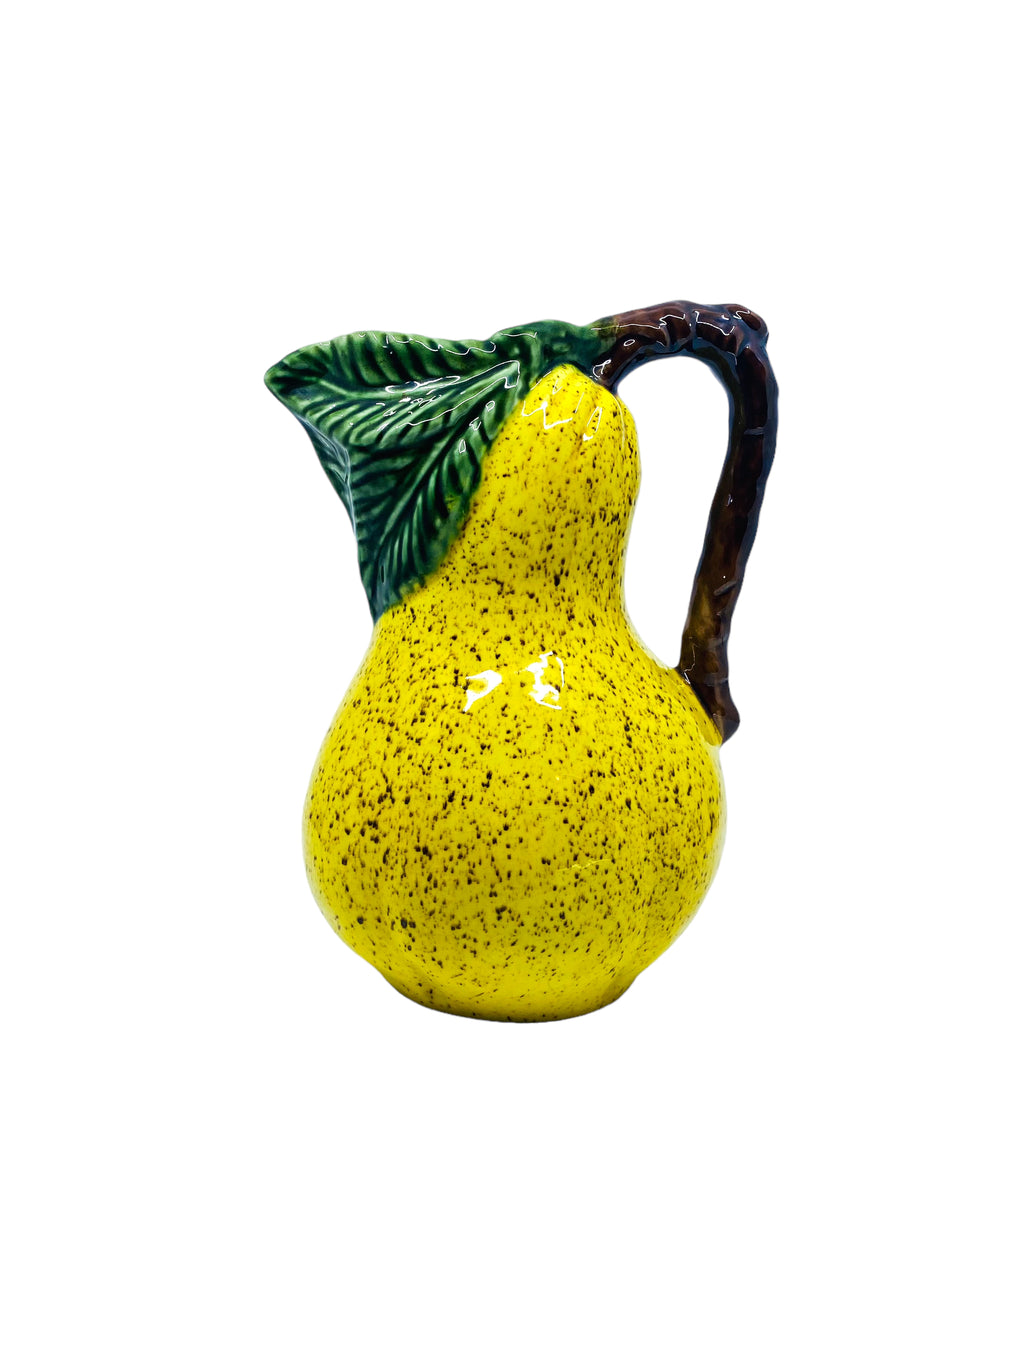 Vintage Oltaire Pear Shaped Ceramic Pitcher, Portugal